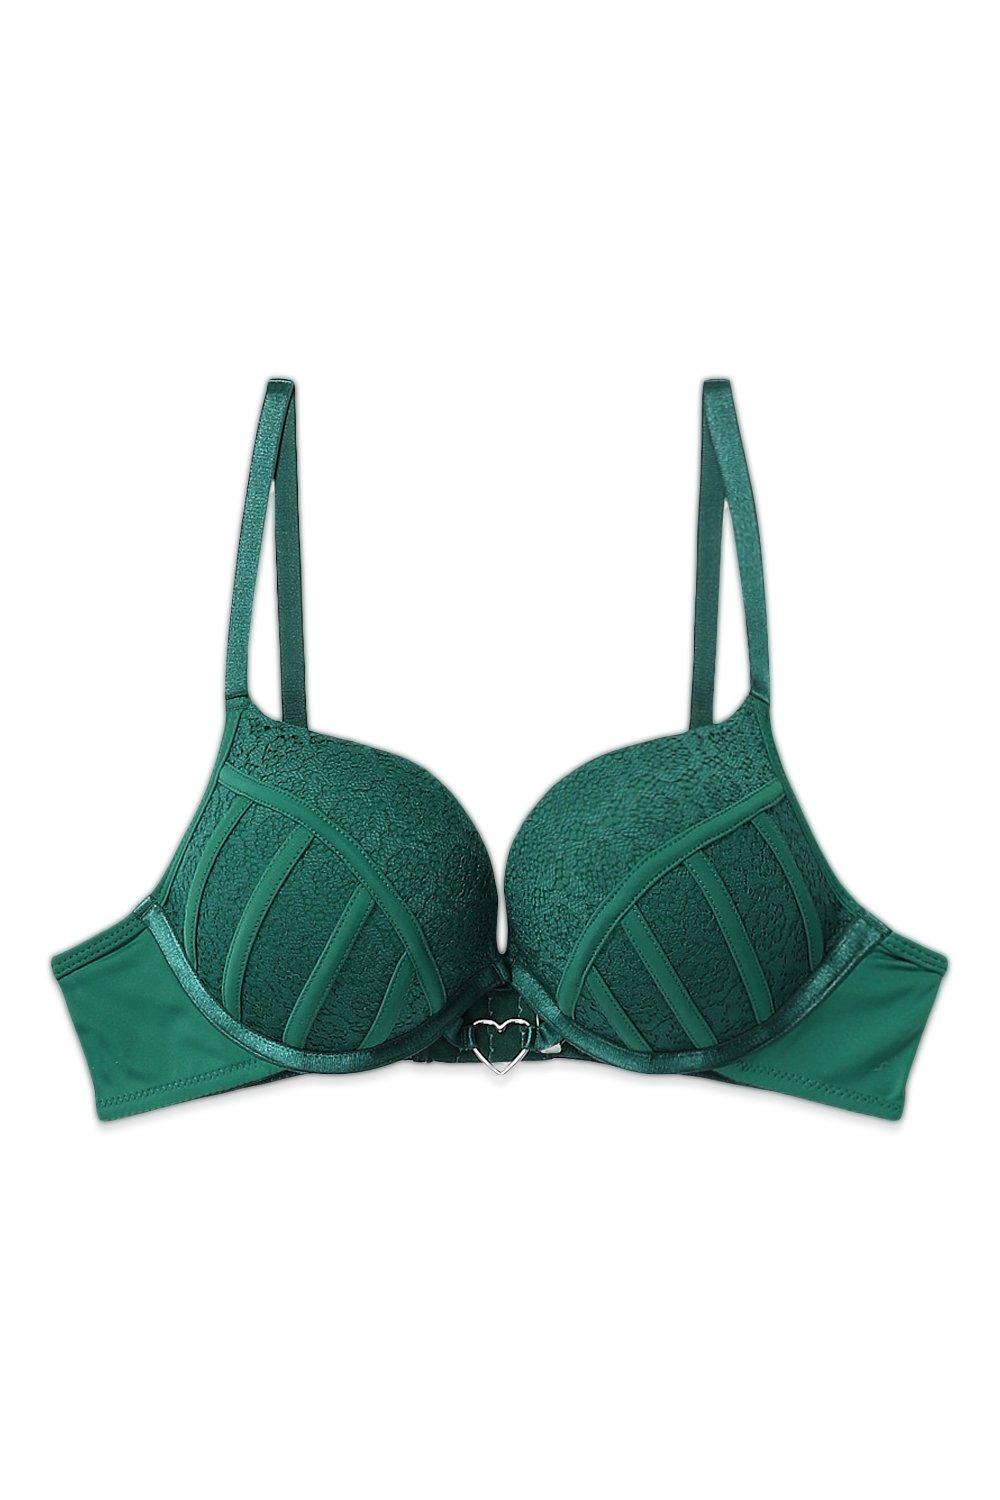 Shyle Aqua Green Lace Winged Push Up Bra With Button Embellished Cups